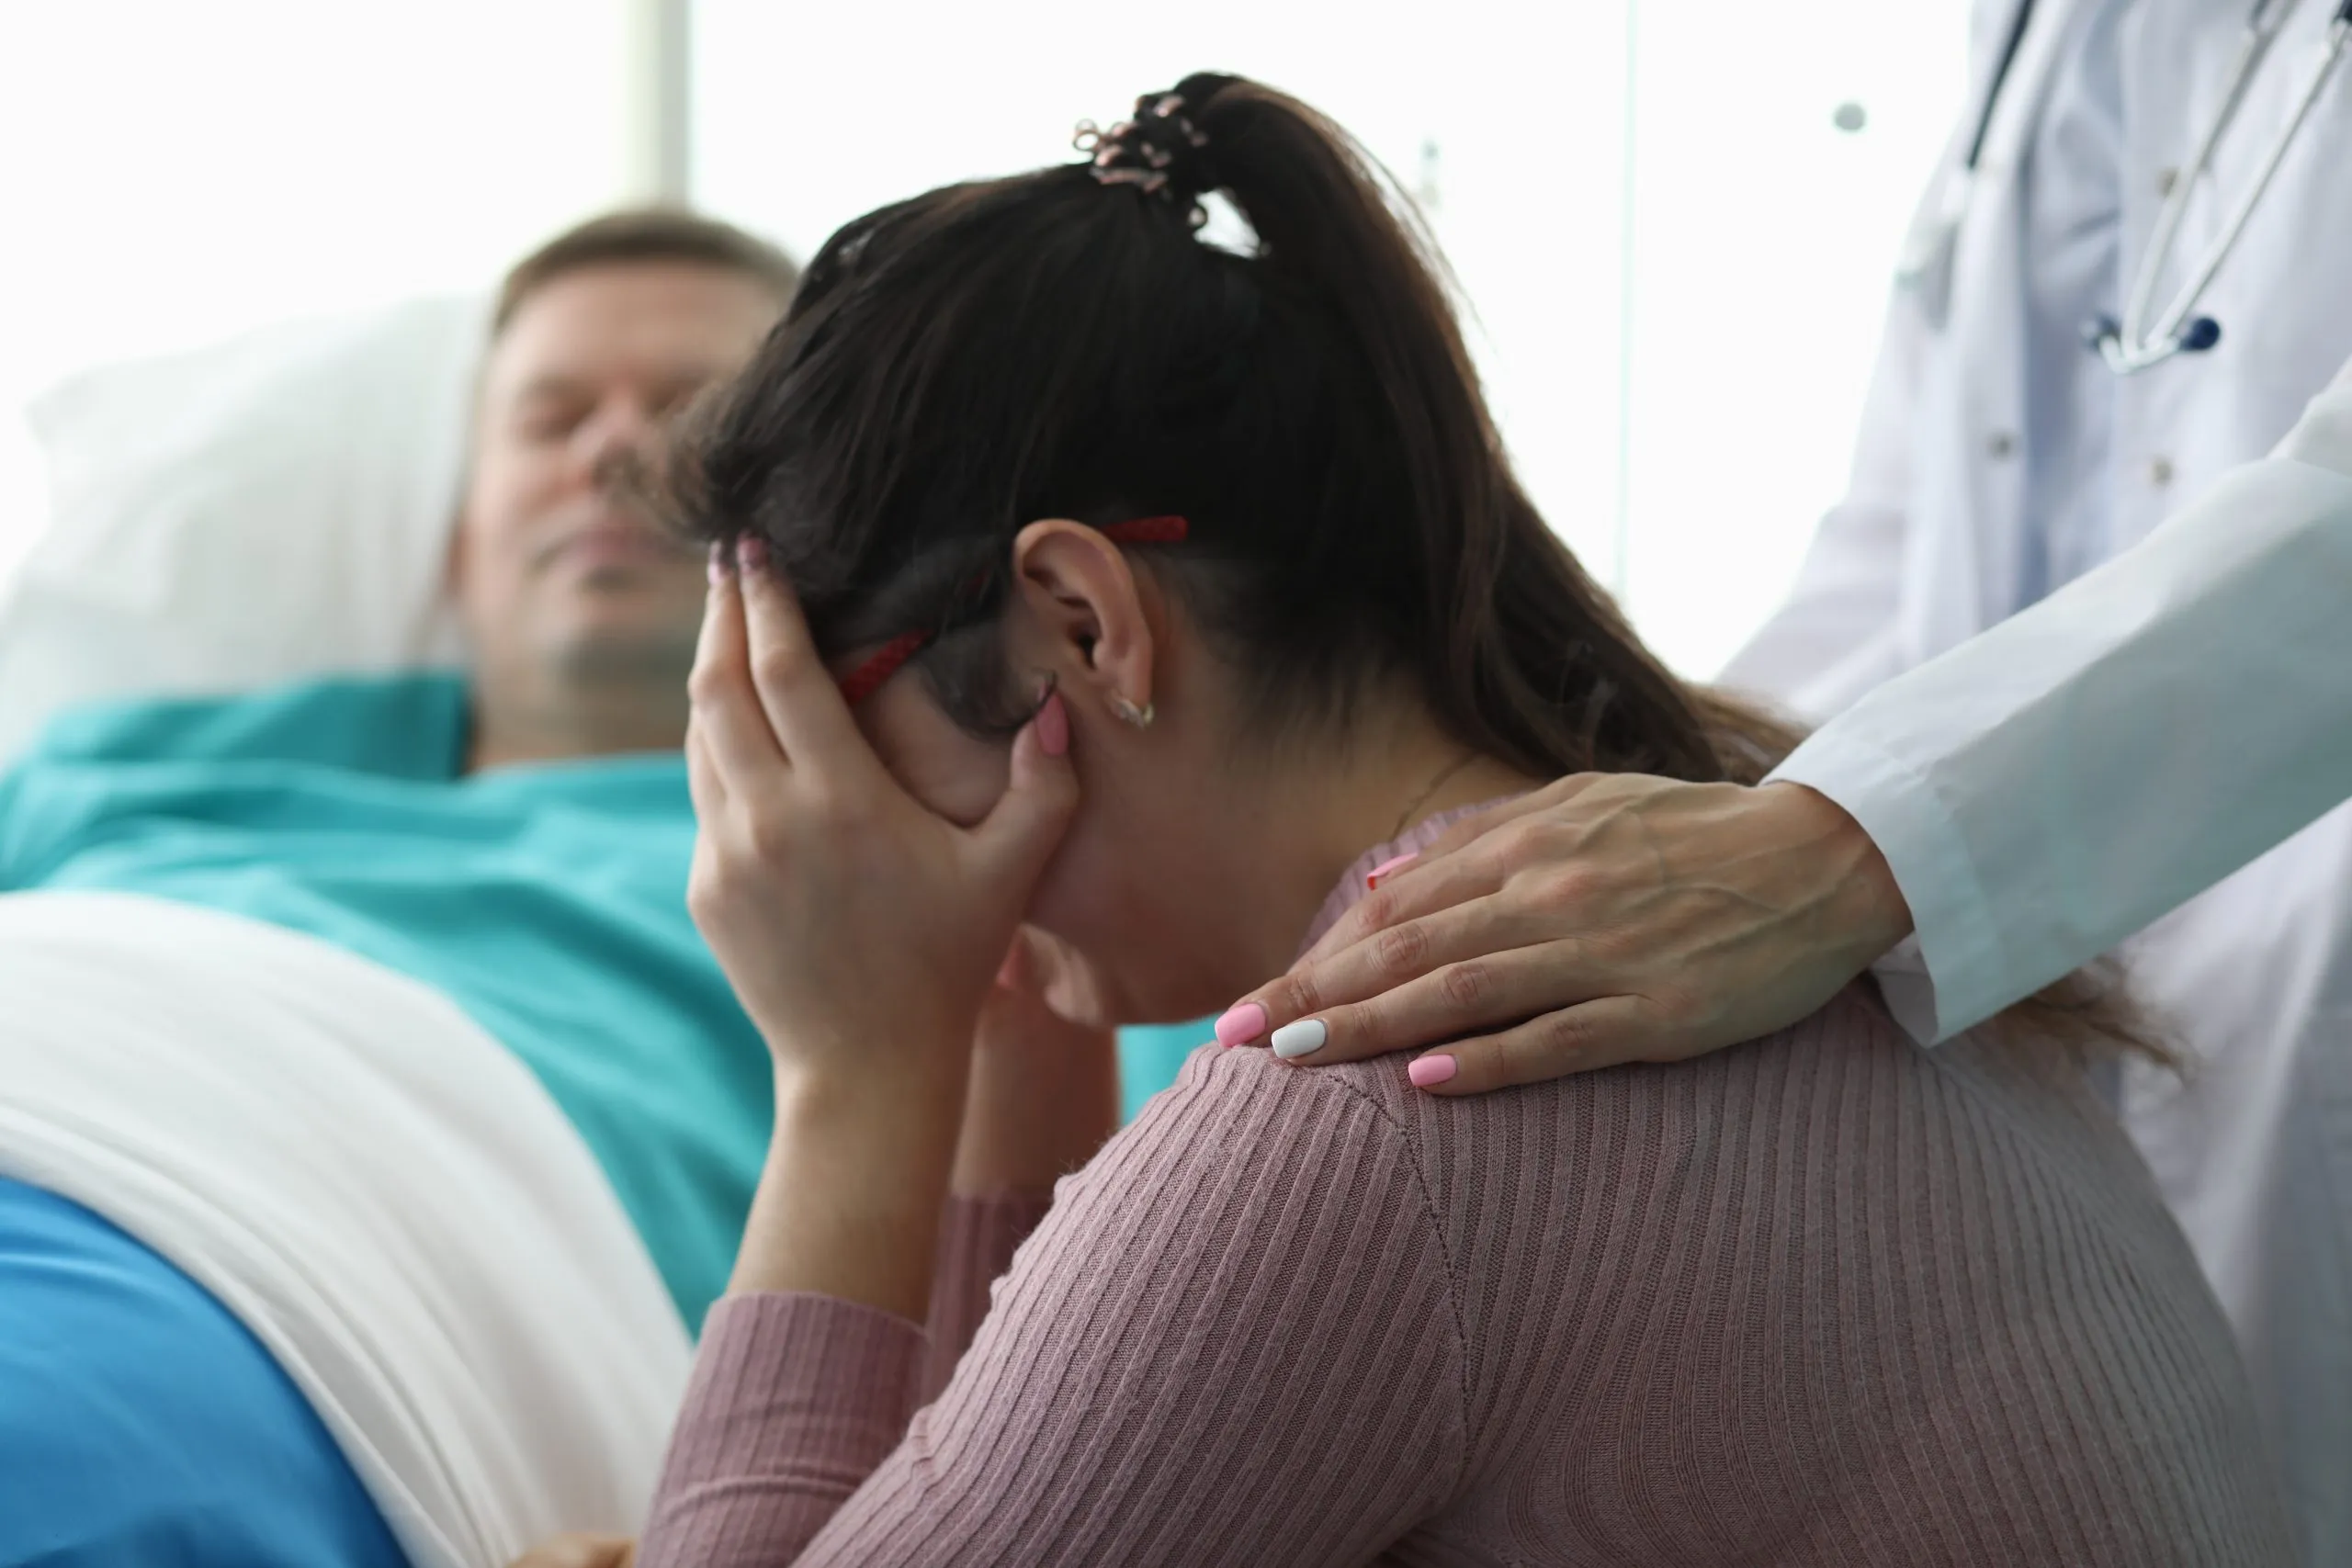 Woman crying in front of man in hospital bed after injury by medical malpractice. If you’ve been injured by a medical professional, speak to a medical malpractice lawyer. 